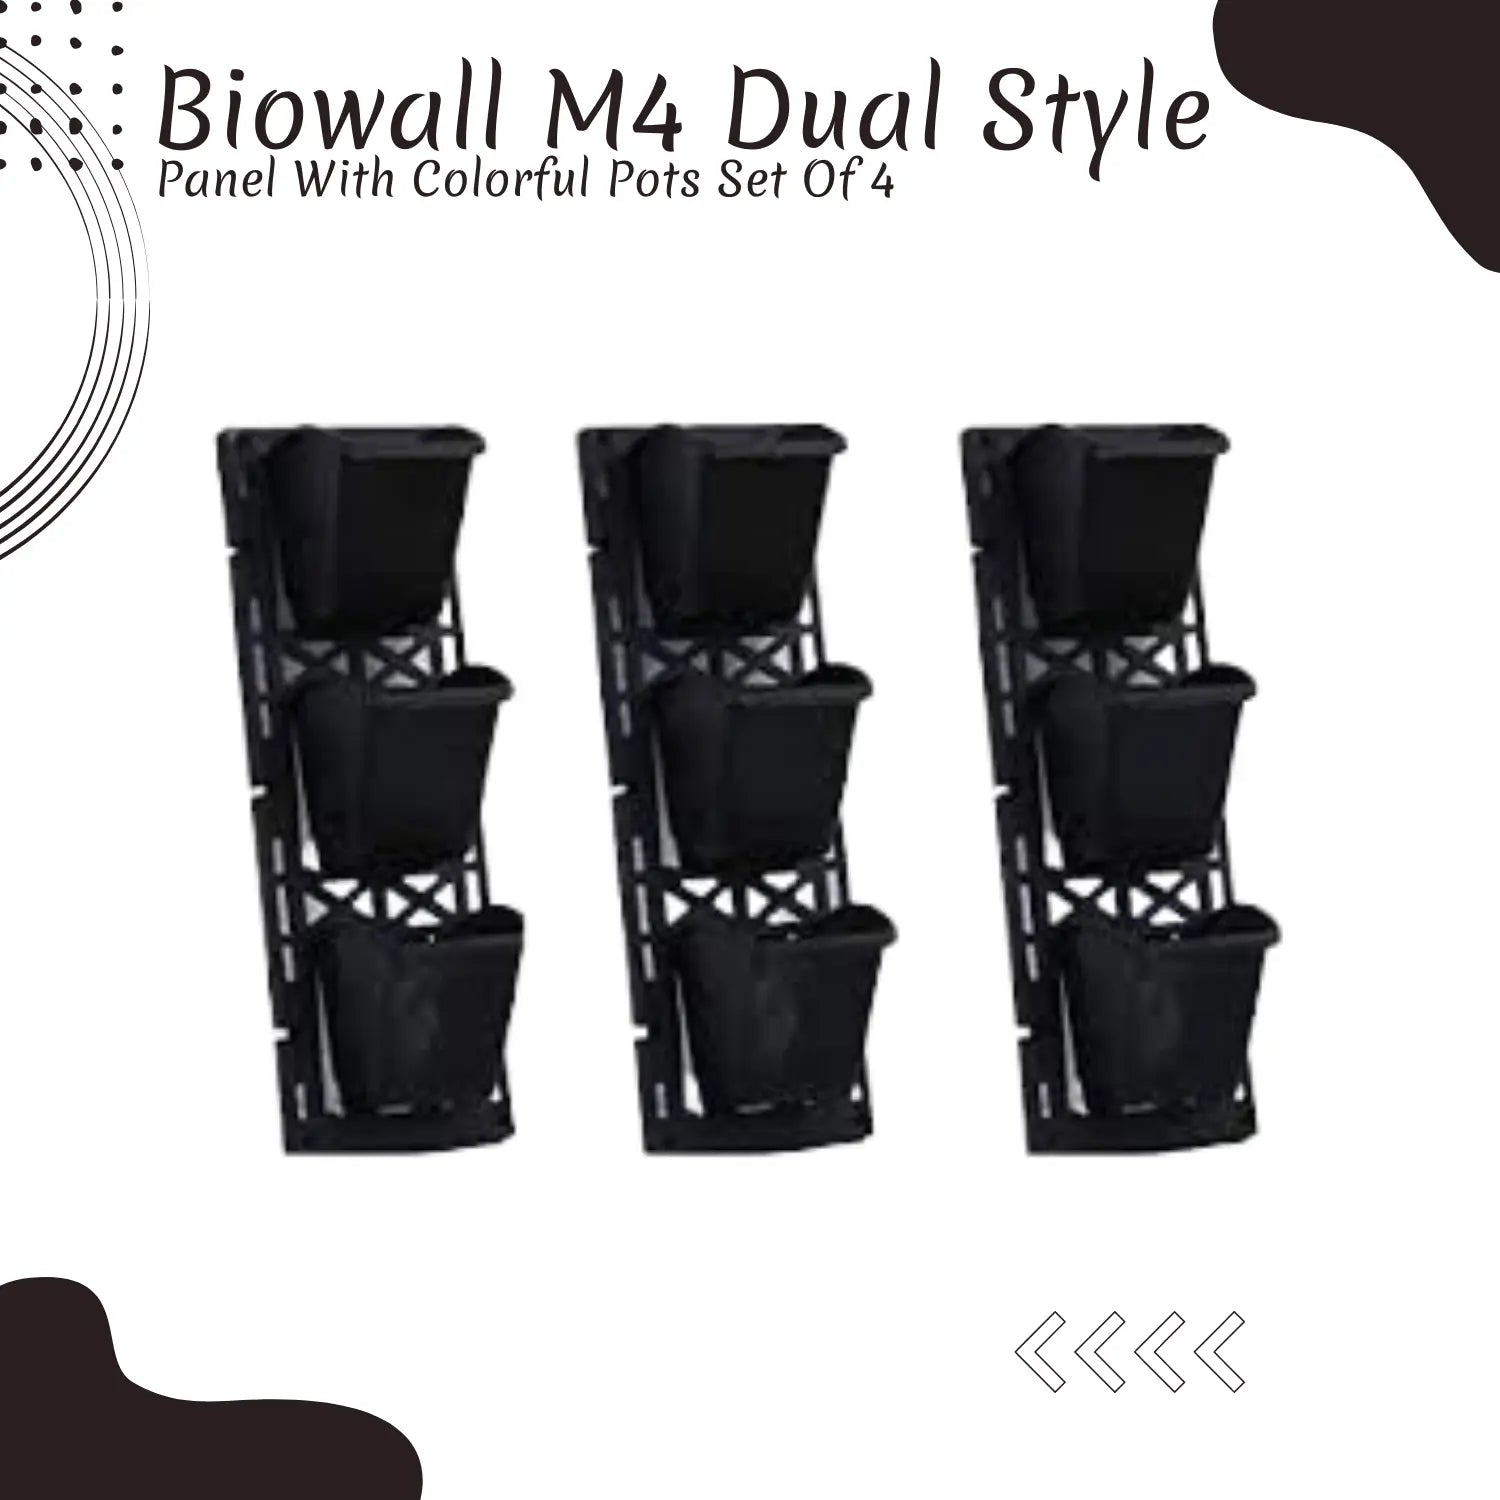 Biowall M4 Dual style panel with pot Black Color Set of 4